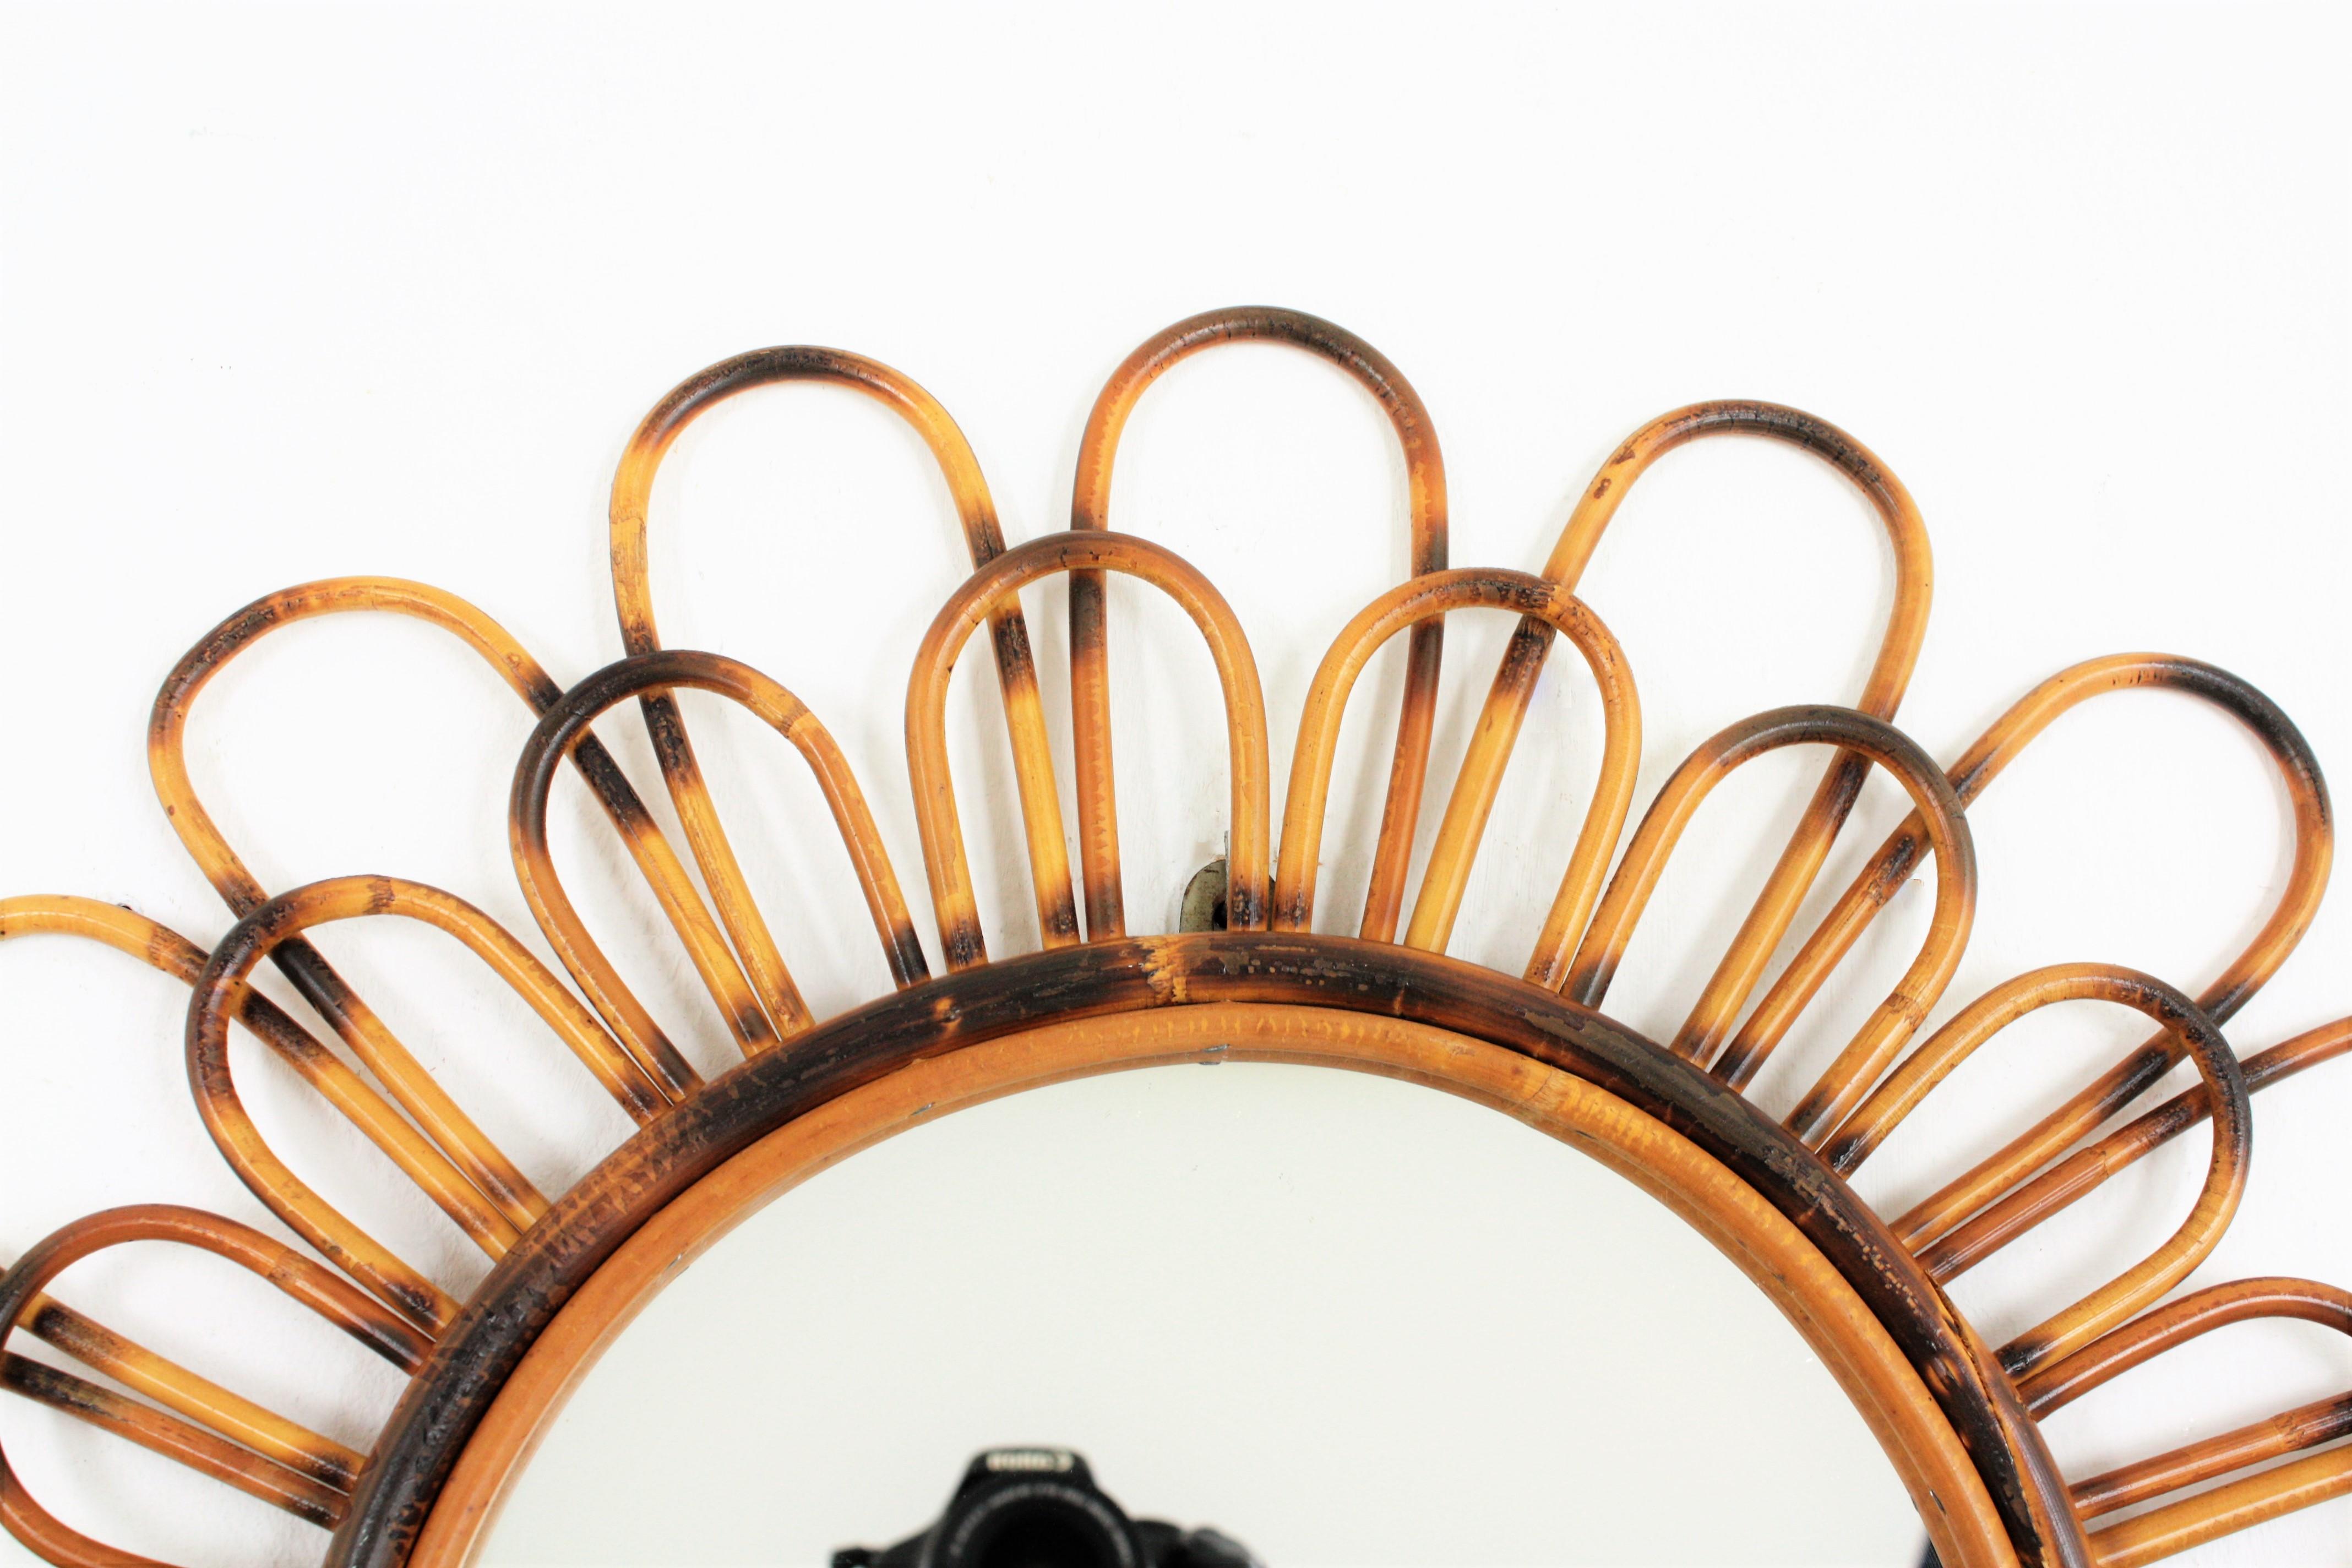 Hand-Crafted French Sunburst Flower Mirror in Rattan, 1960s For Sale